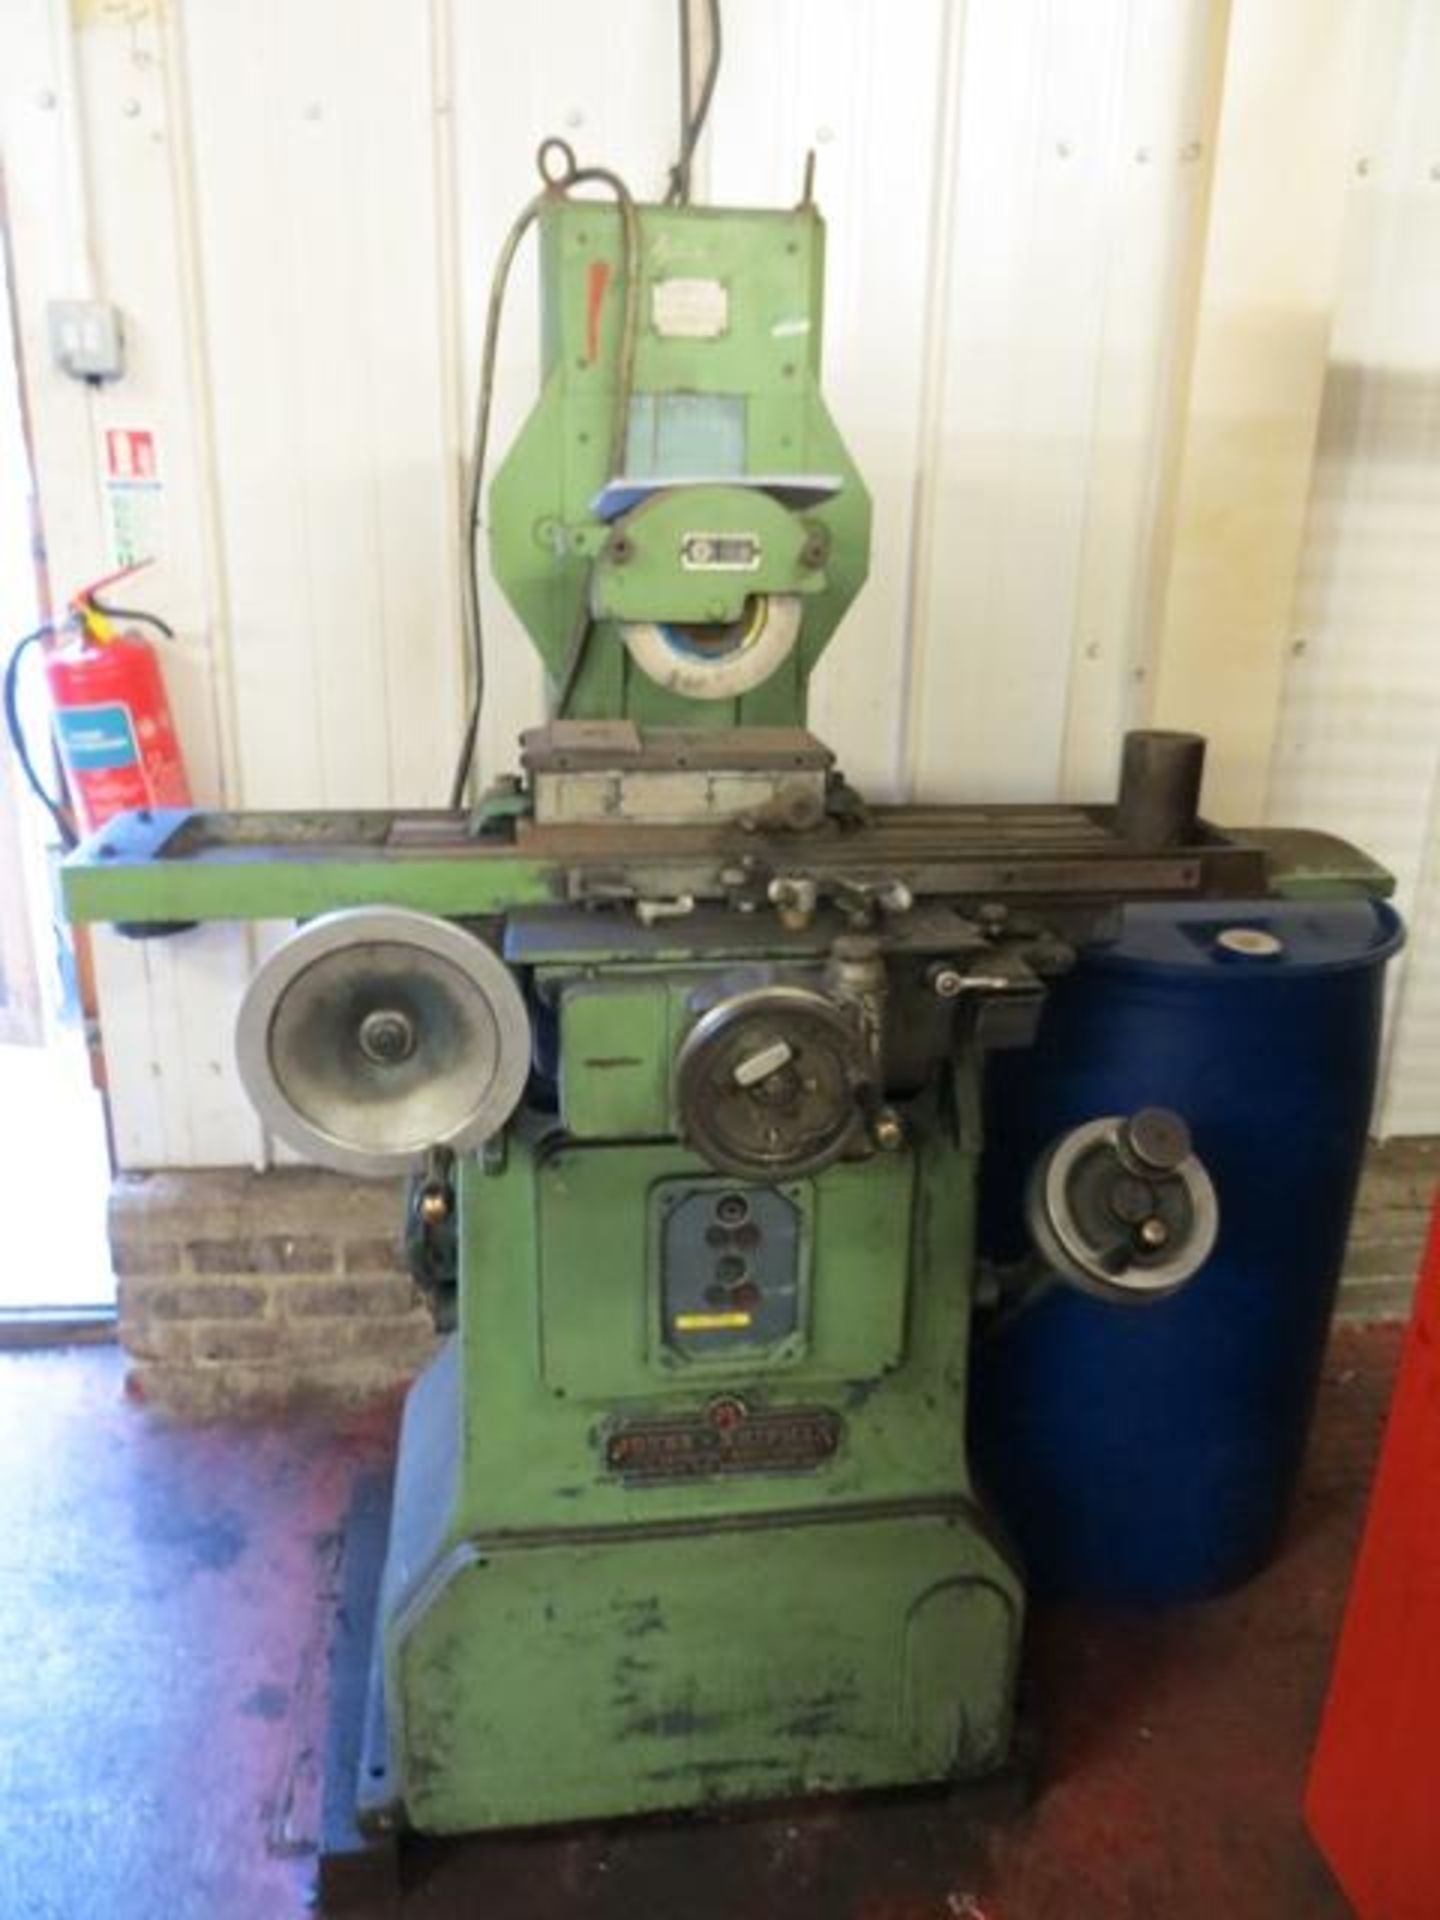 Jones & Shipman Auto Horizontal Surface Grinder model A2G2 (1952) s/n 50M204 with Eclipse type